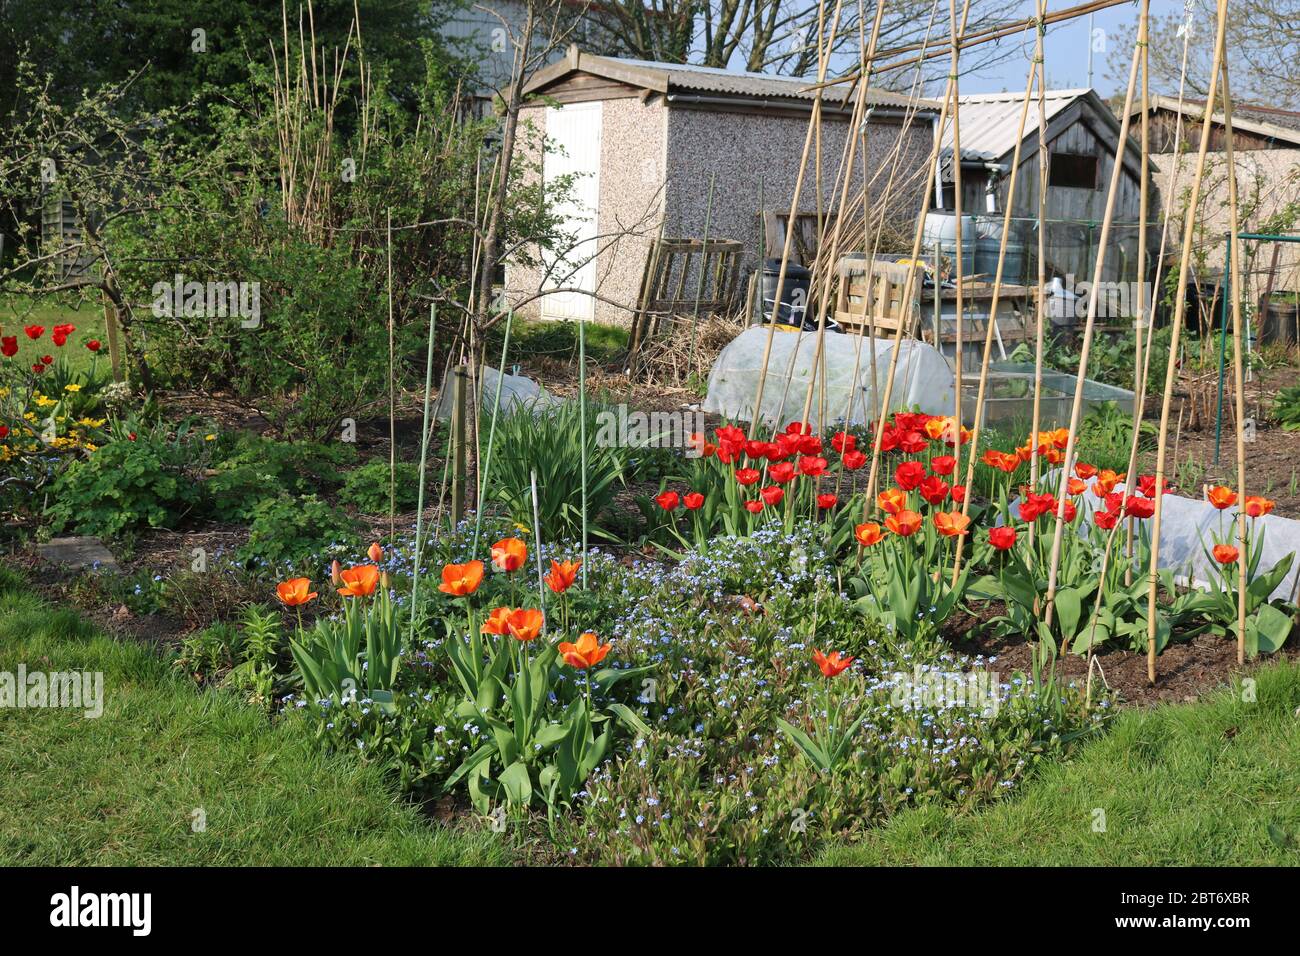 Allotment with orange and yellow tulips as well as vegetables growing on it with small sheds in the background Stock Photo